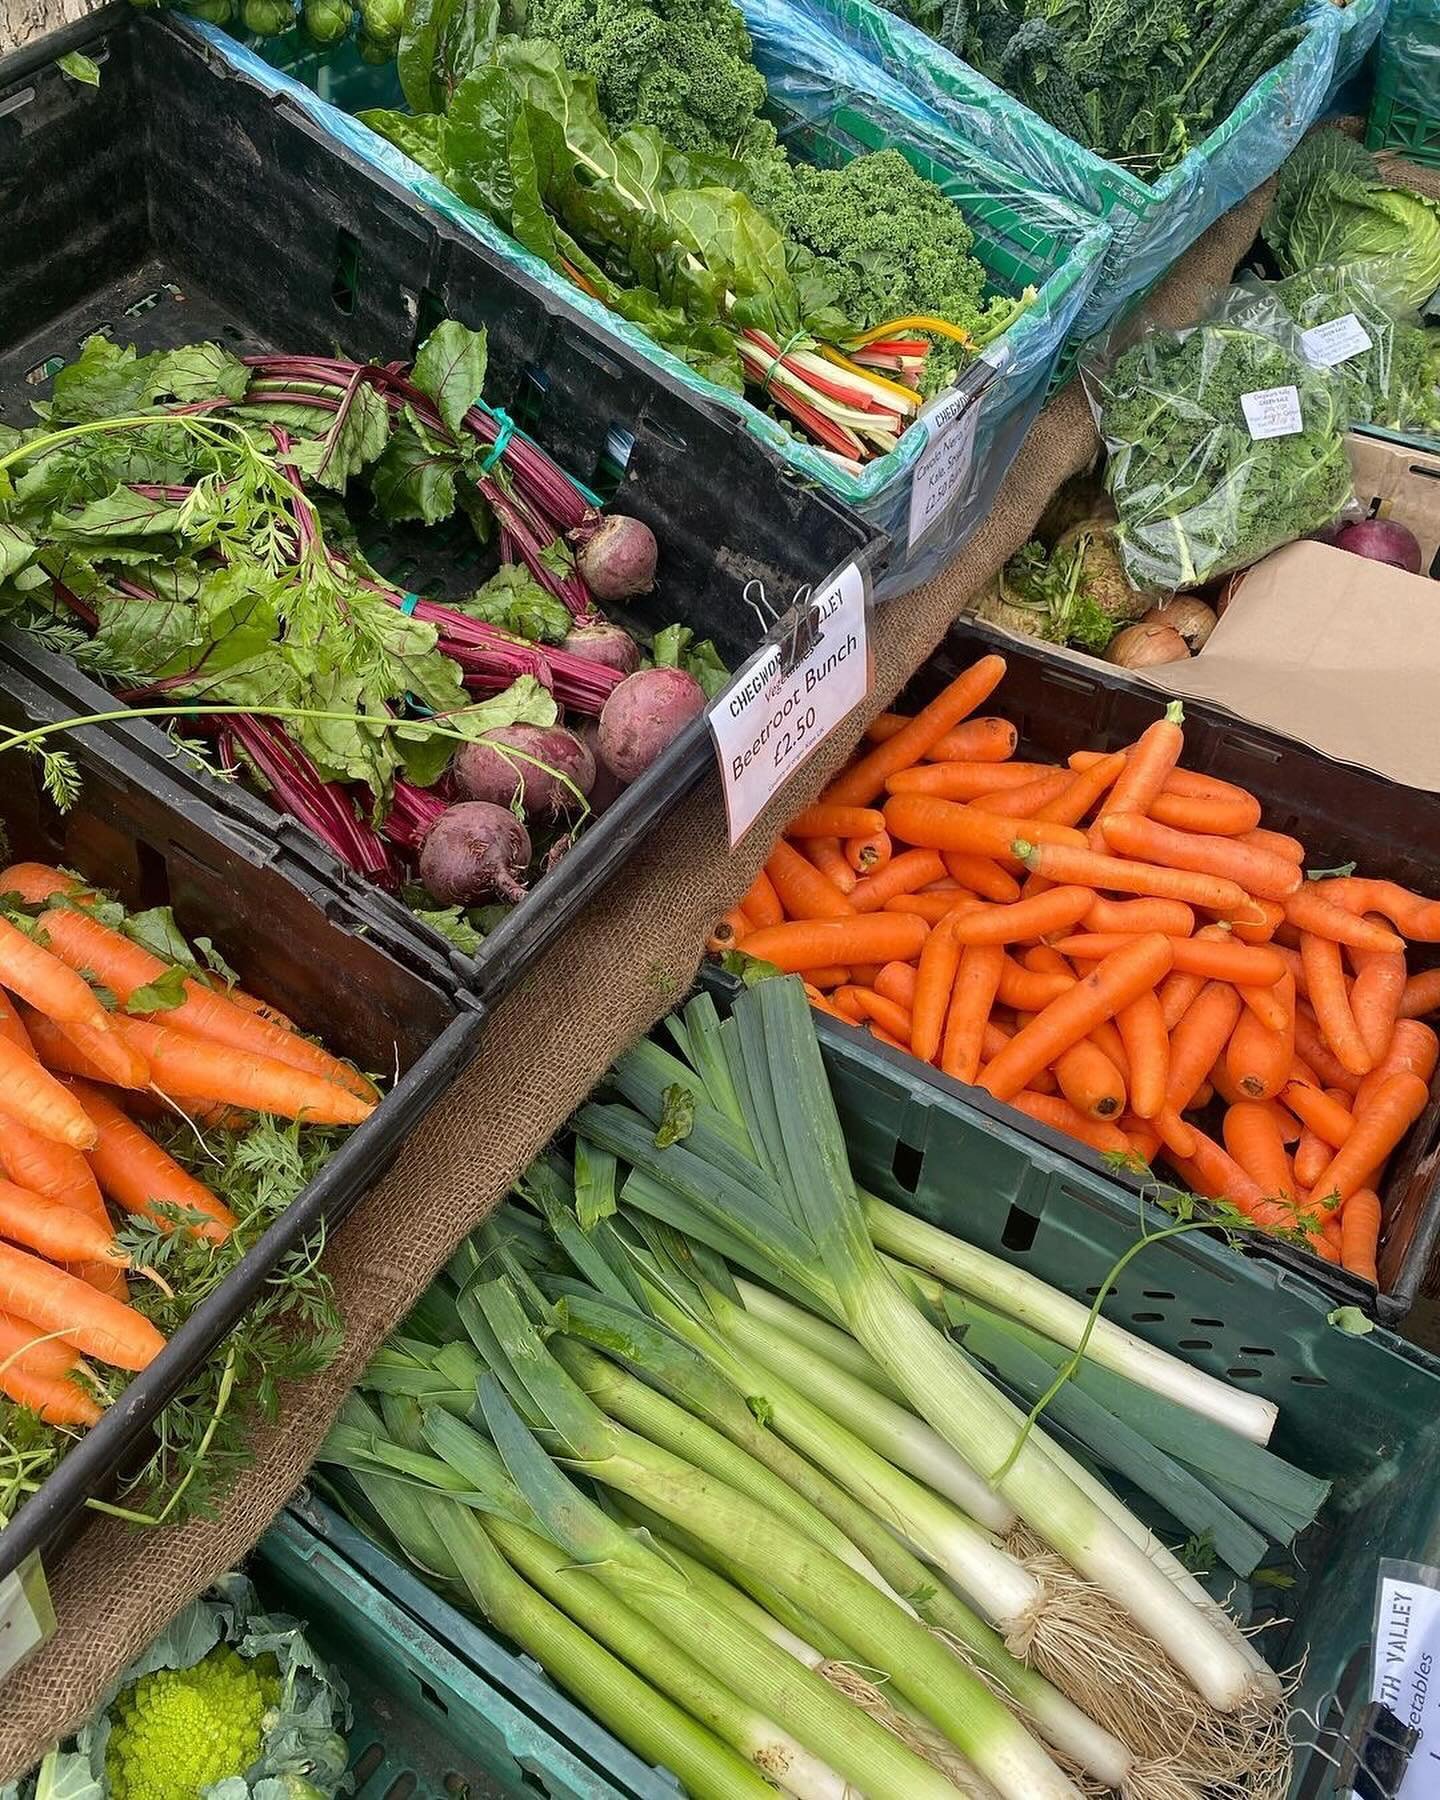 Taking place every Saturday in the area known locally as Orange or Mozart Square, Pimlico Farmers&rsquo; Market has plenty to offer Londoners, from seasonal fruit and vegetables to fresh juice and handmade pasta. It&rsquo;s easy to see how it became 